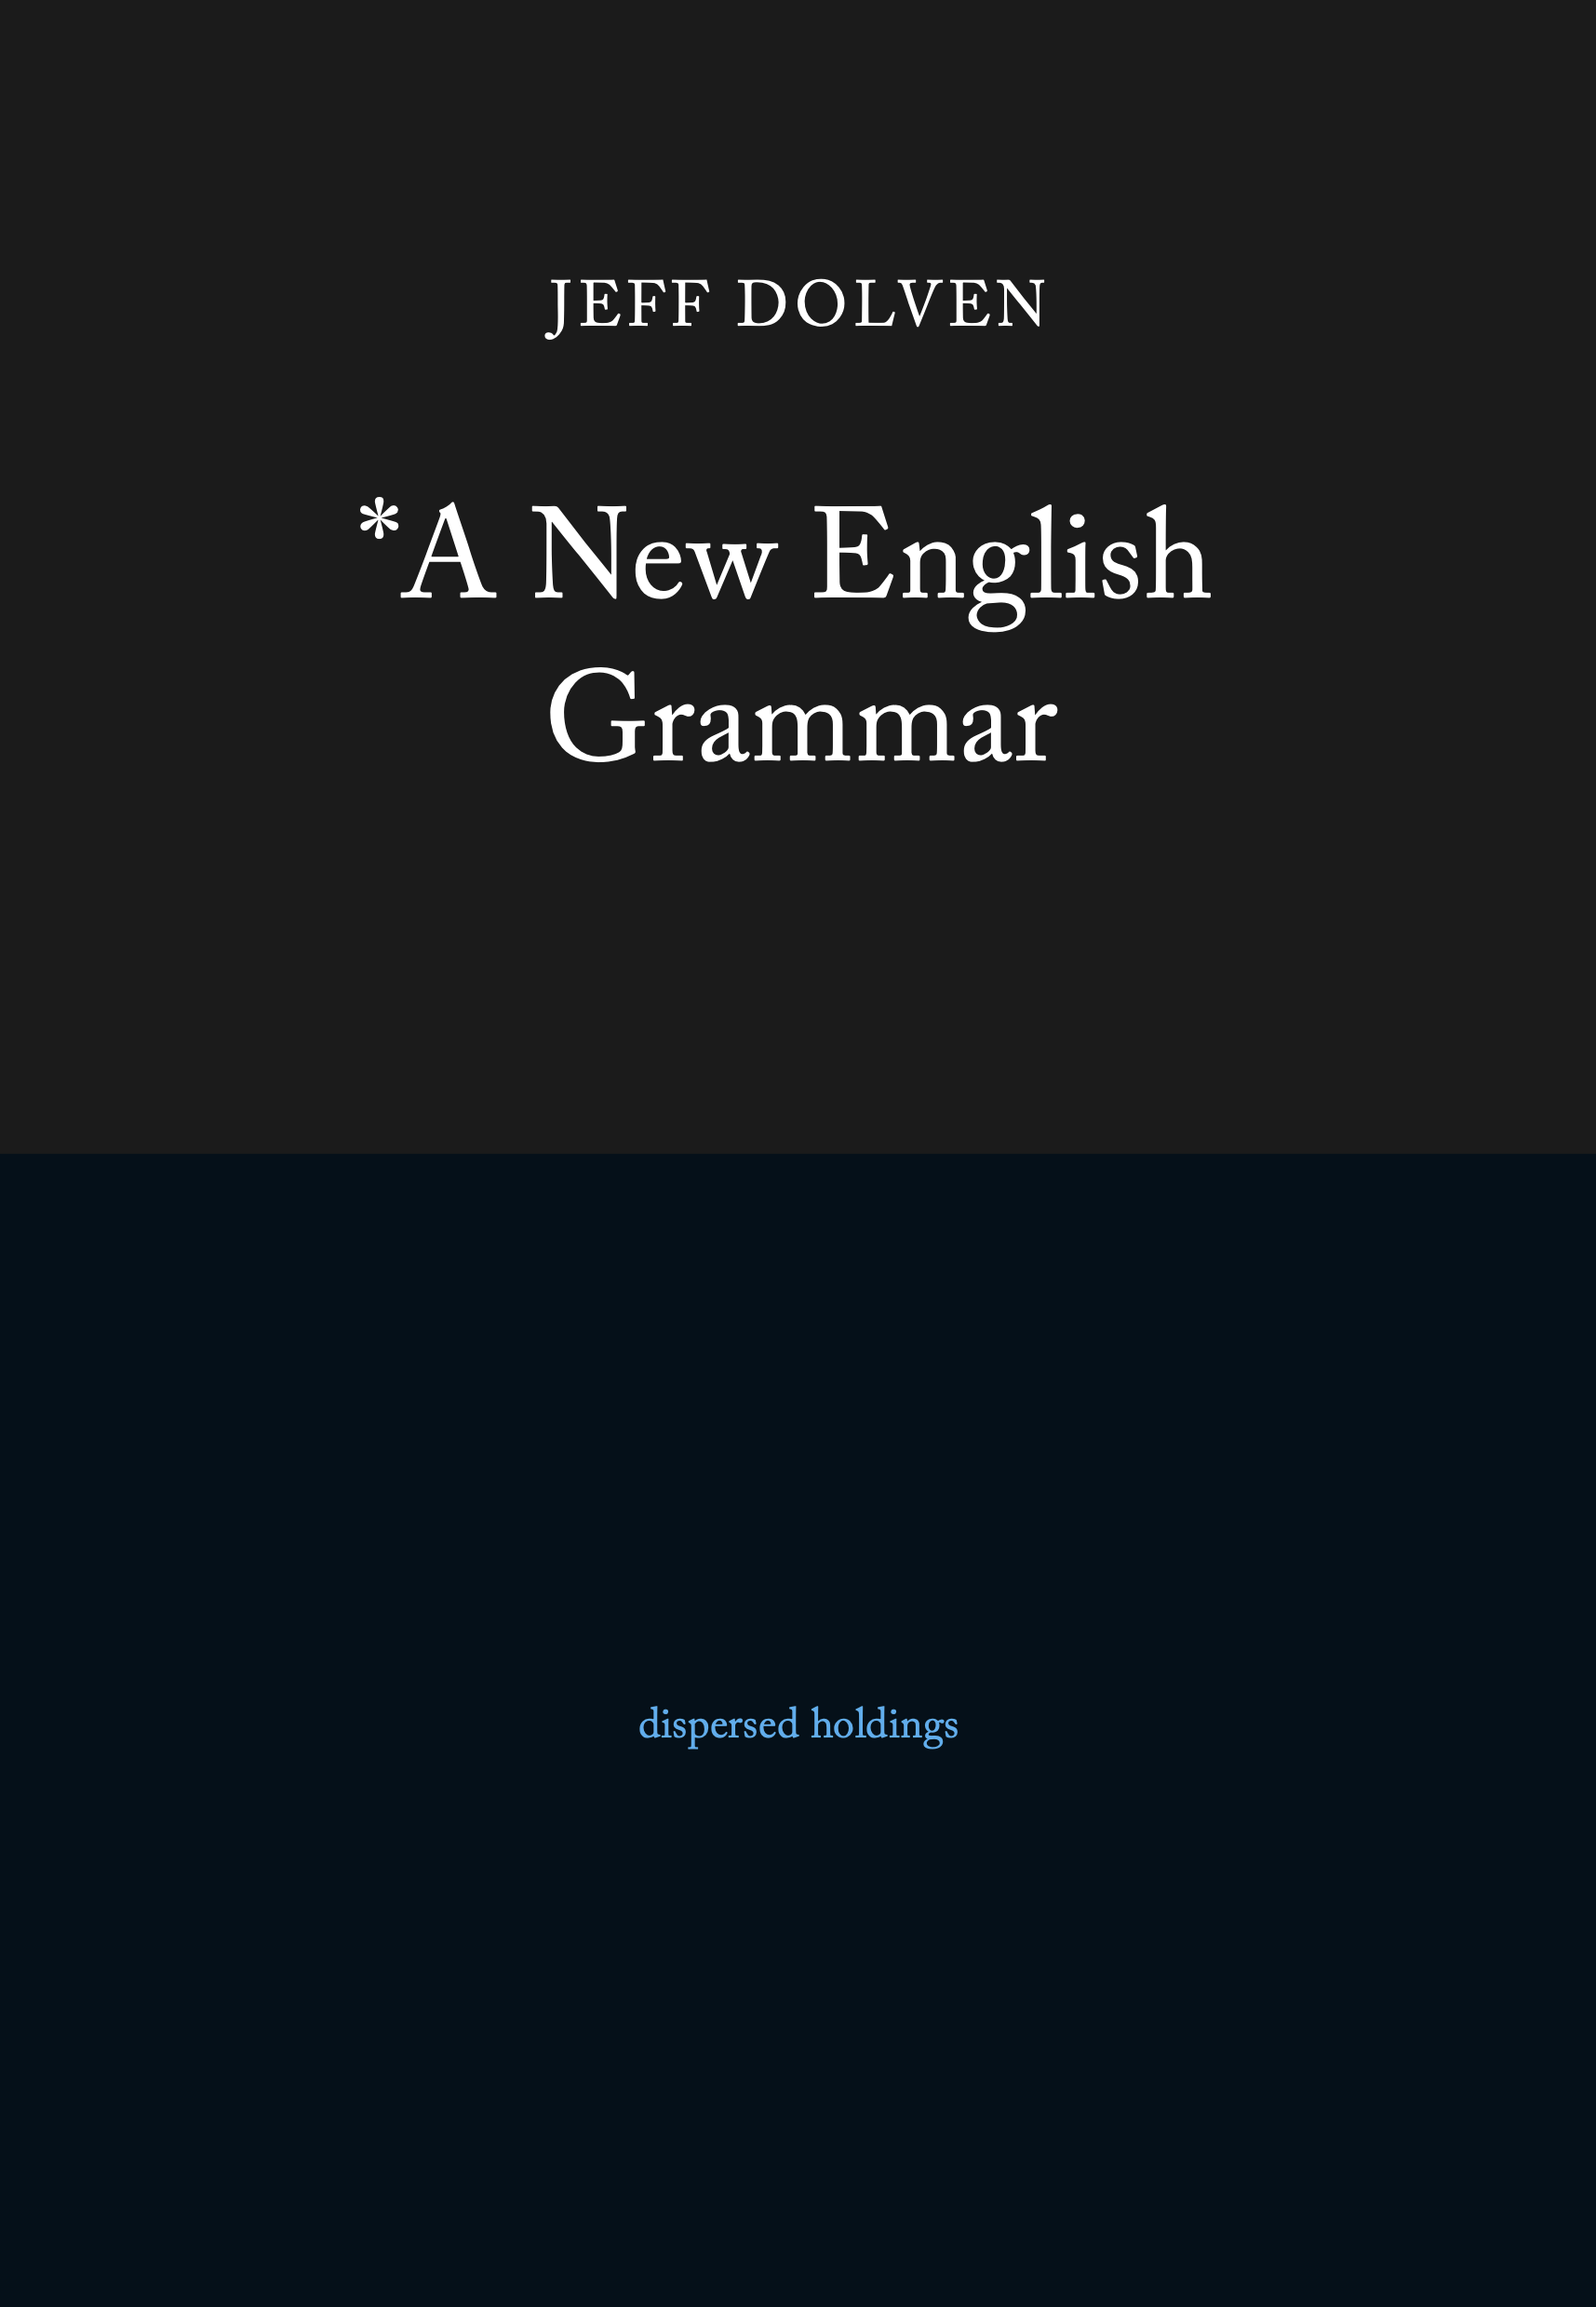 New English Grammar Front Cover.png